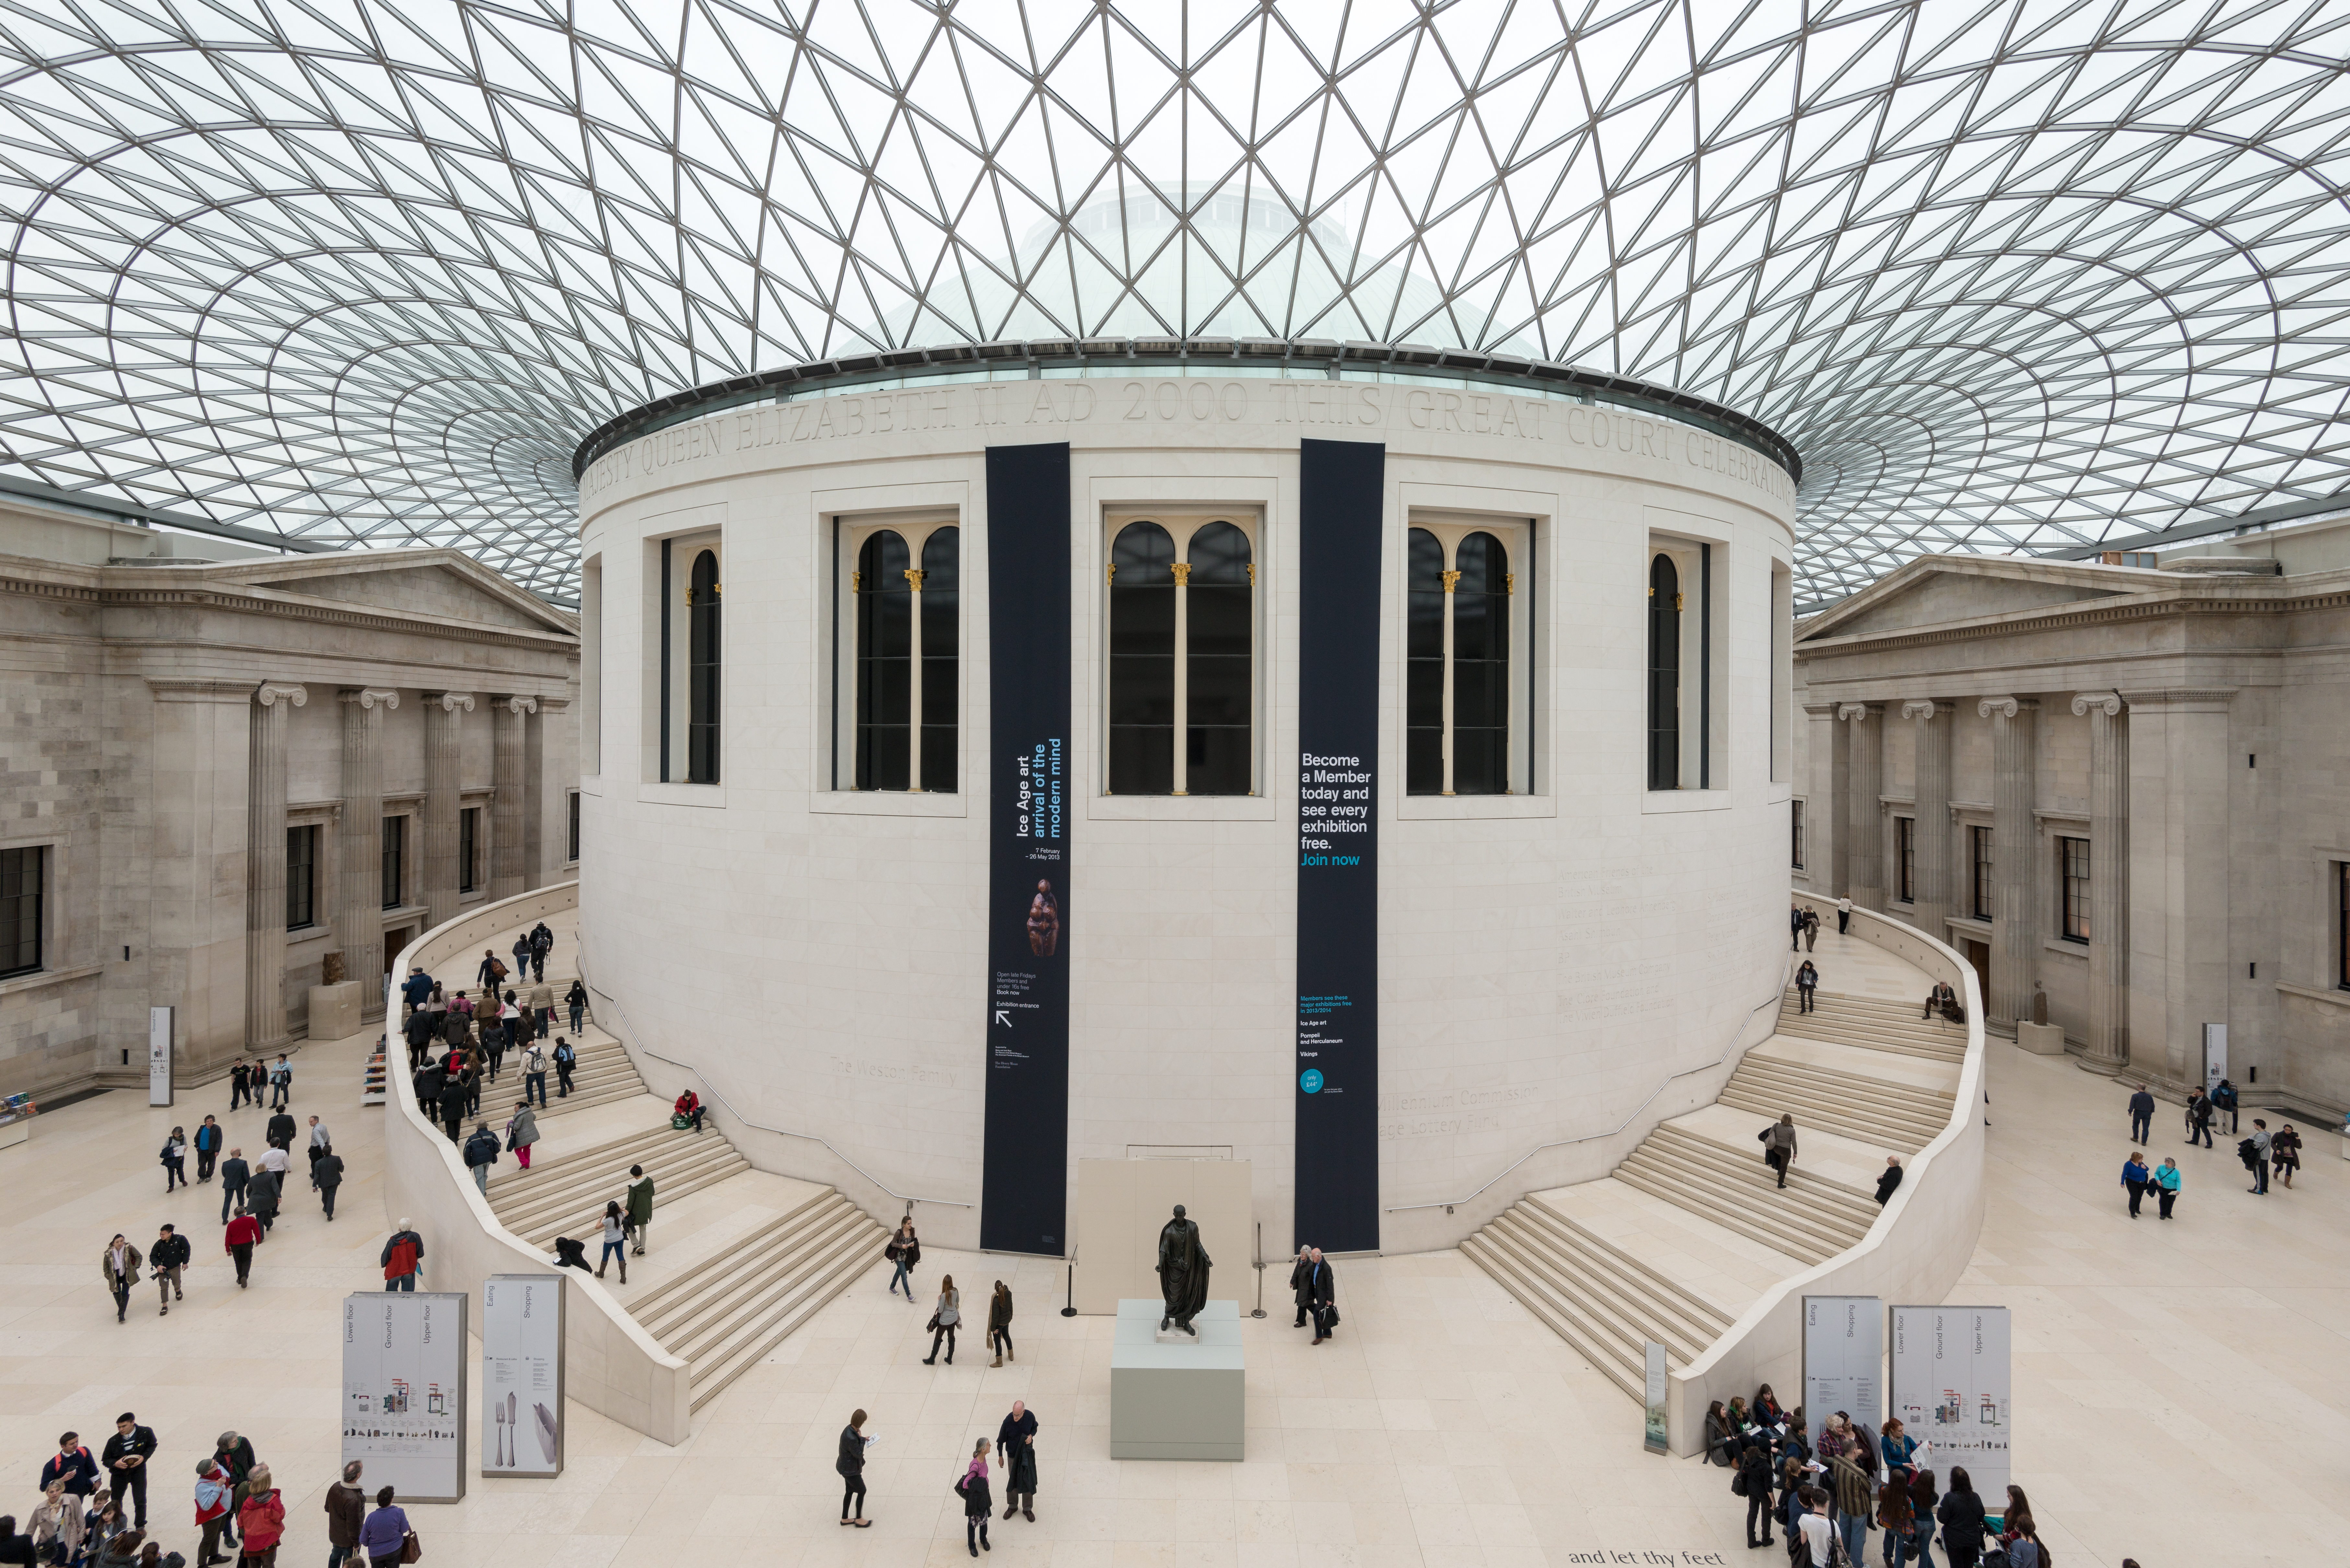 Interior view of the Great Court at the British Museum